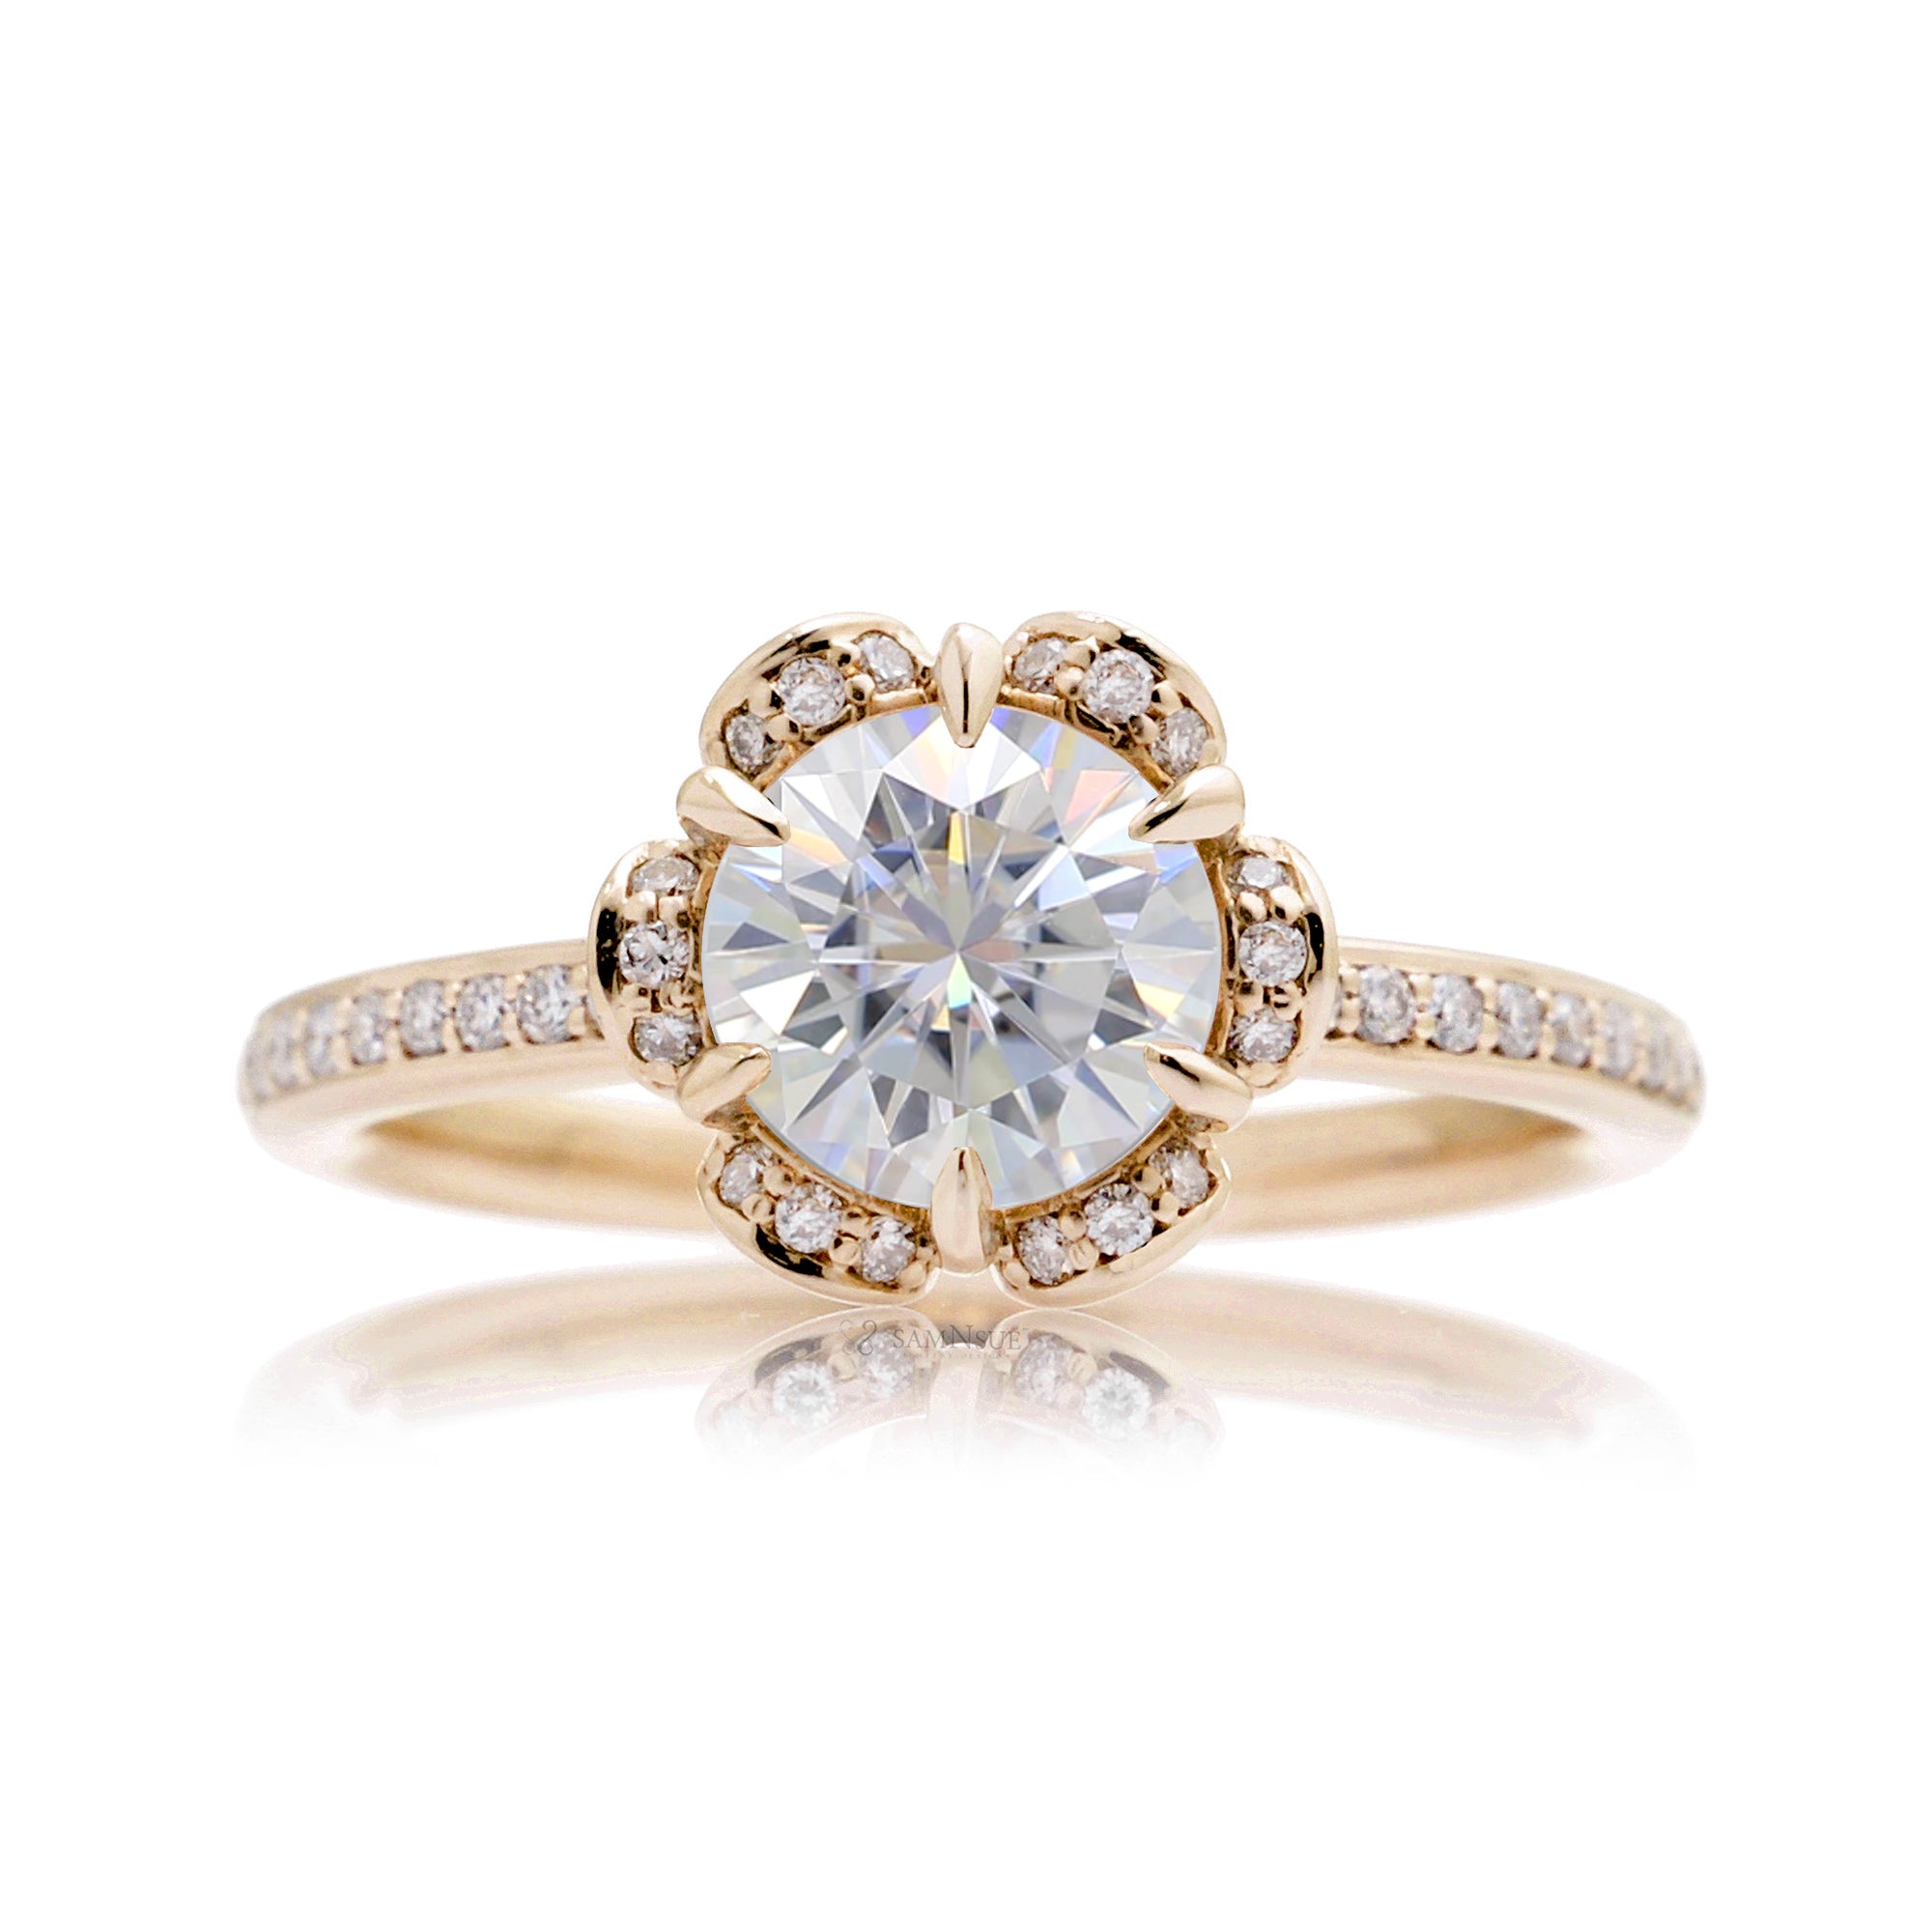 Round moissanite floral engagement ring yellow gold